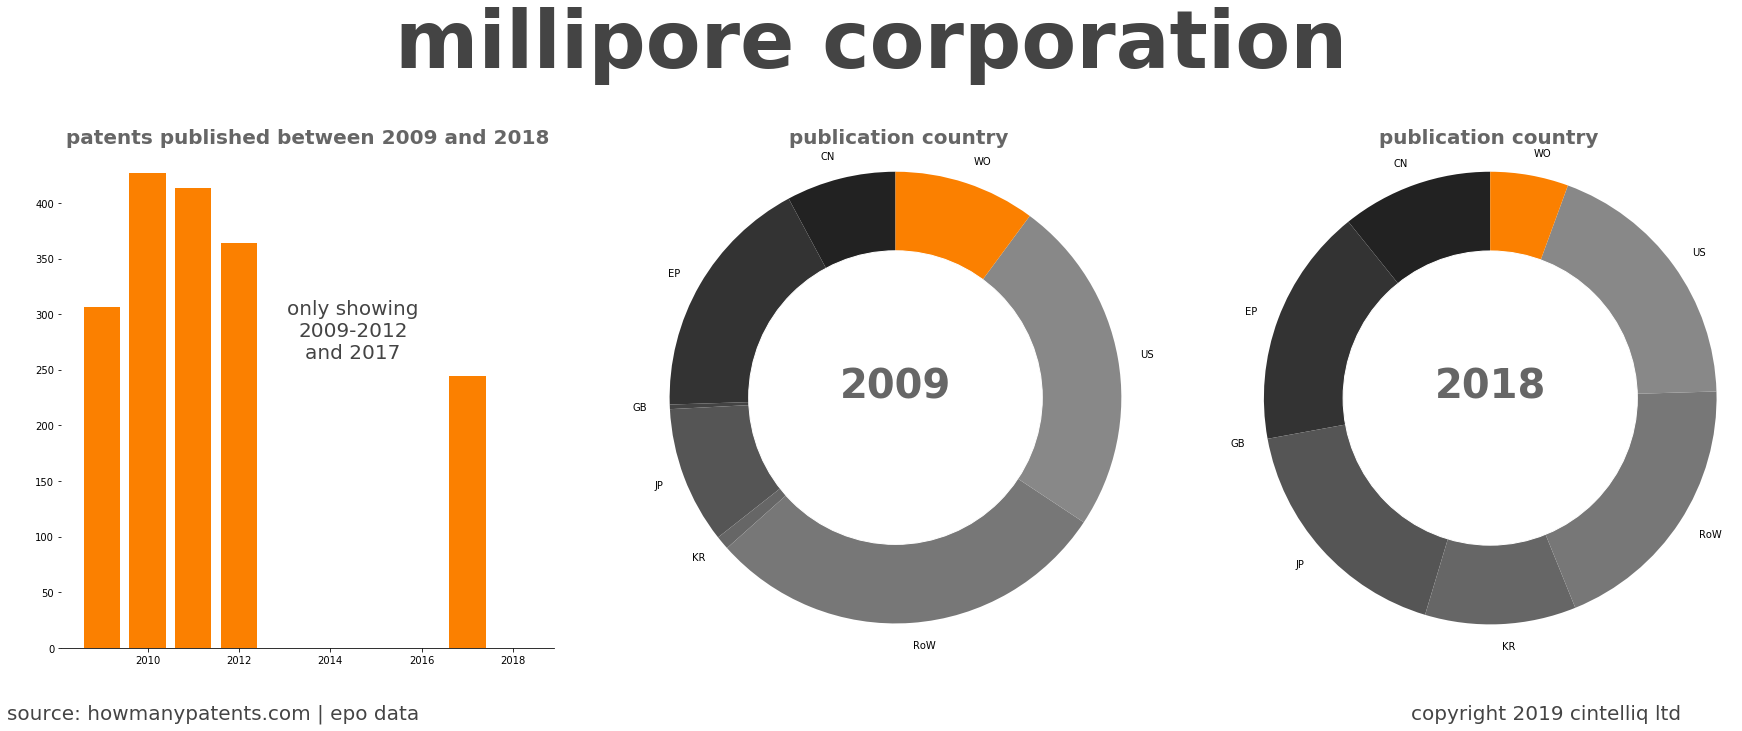 summary of patents for Millipore Corporation